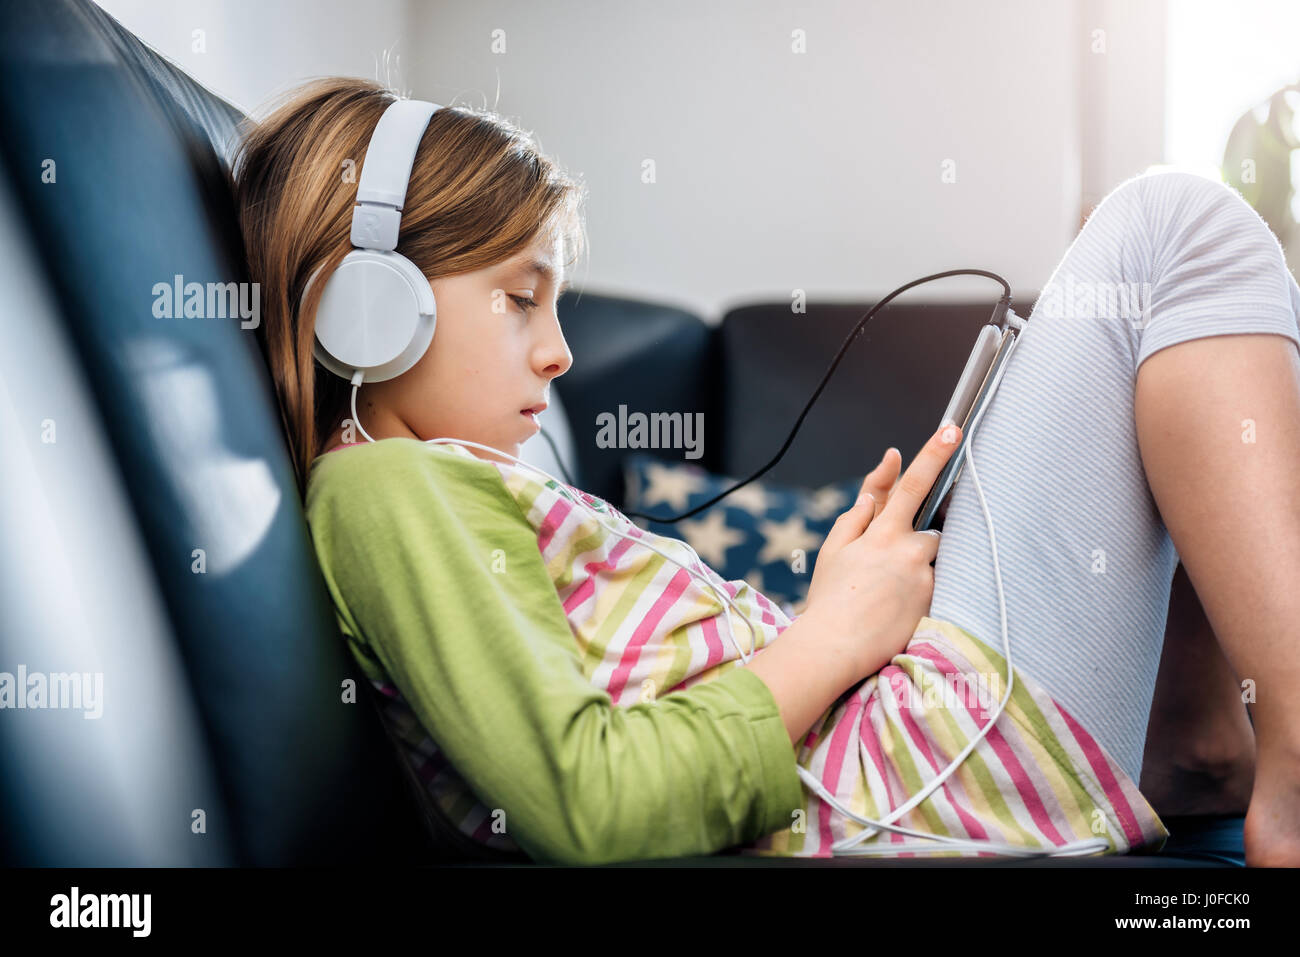 Girl sitting on black sofa using tablet and listening music Stock Photo